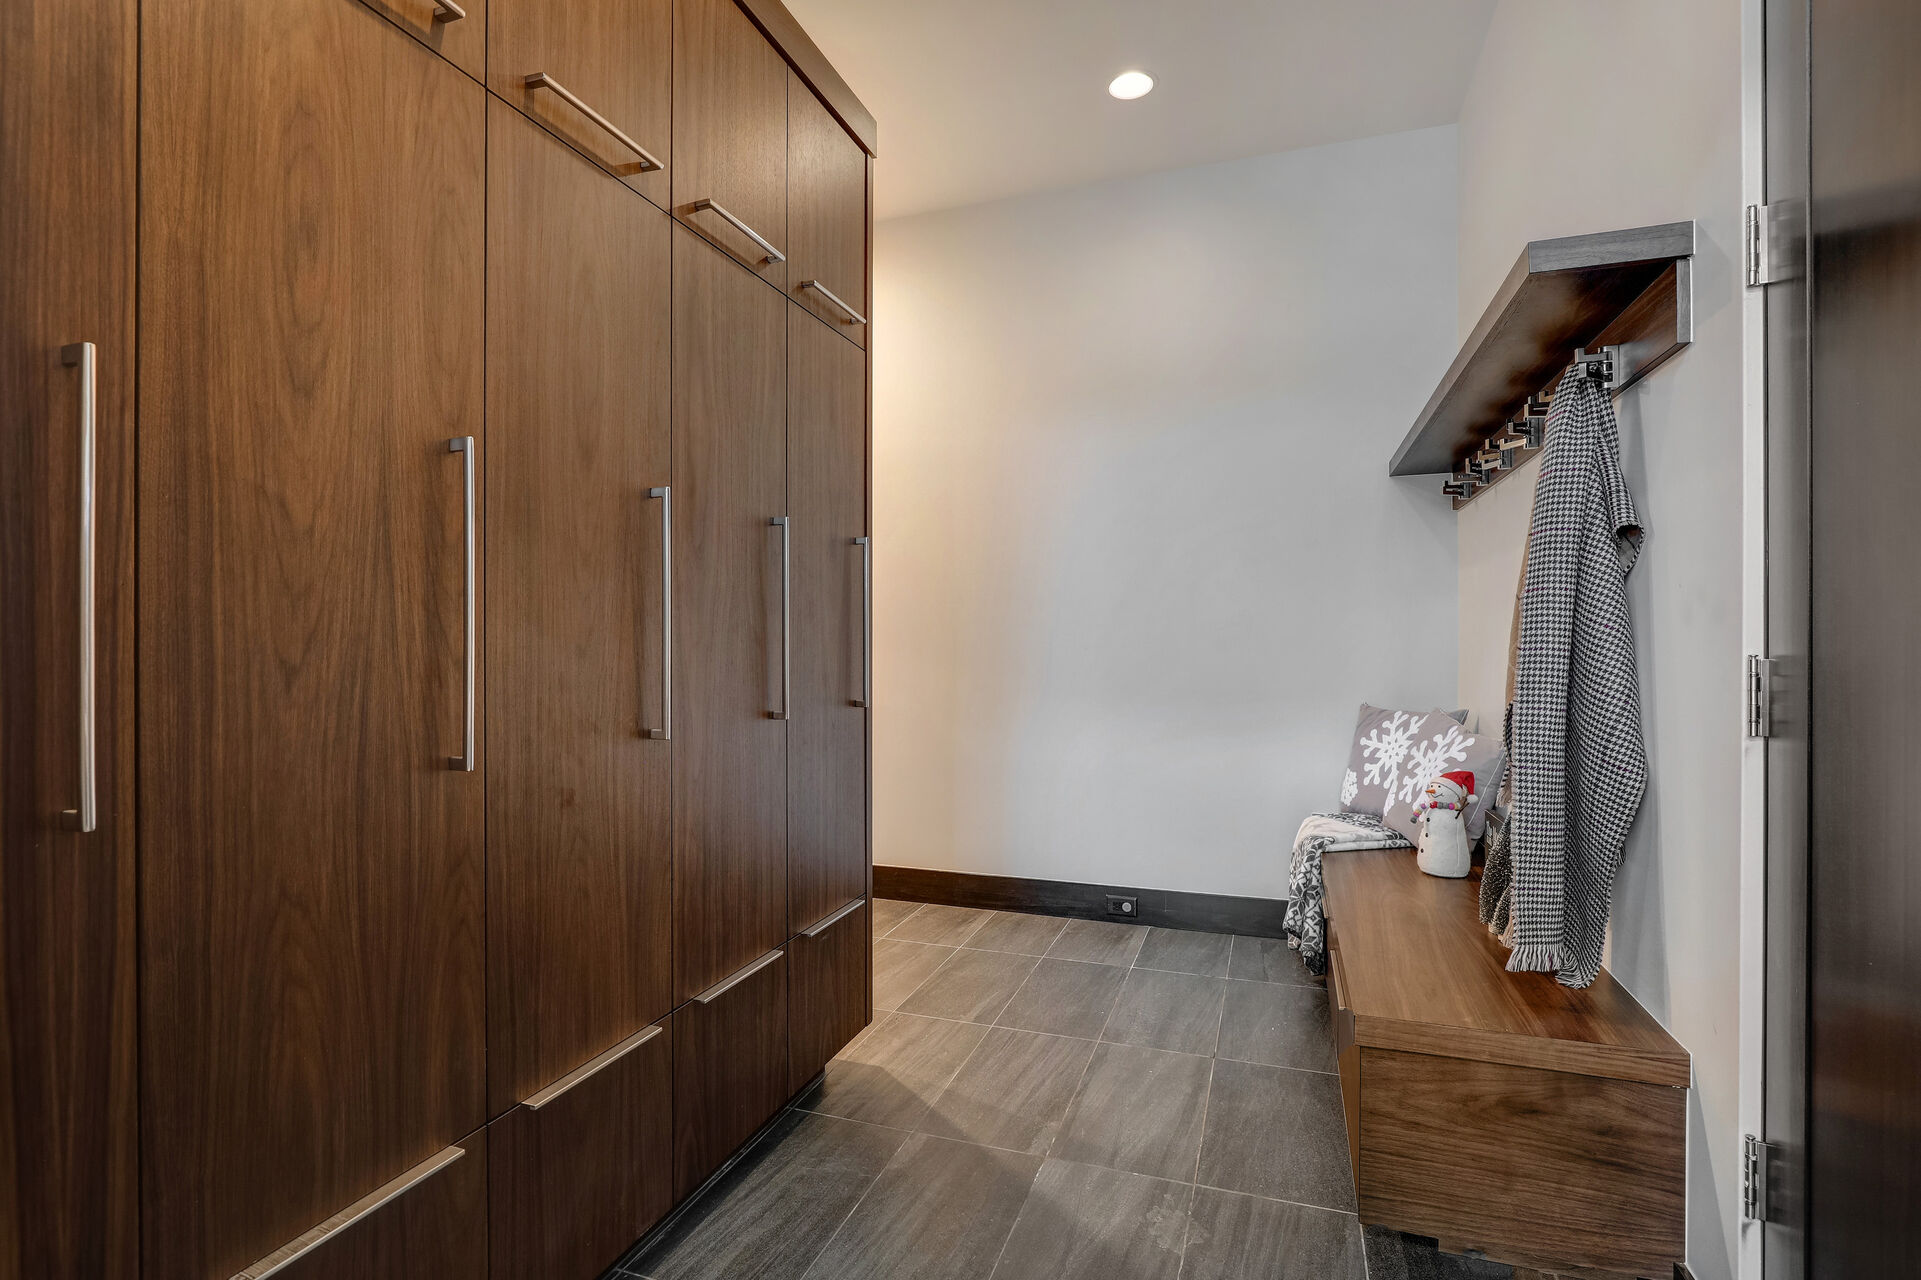 Garage Entryway Mud Room with convenient bench, coat hooks, and equipment lockers